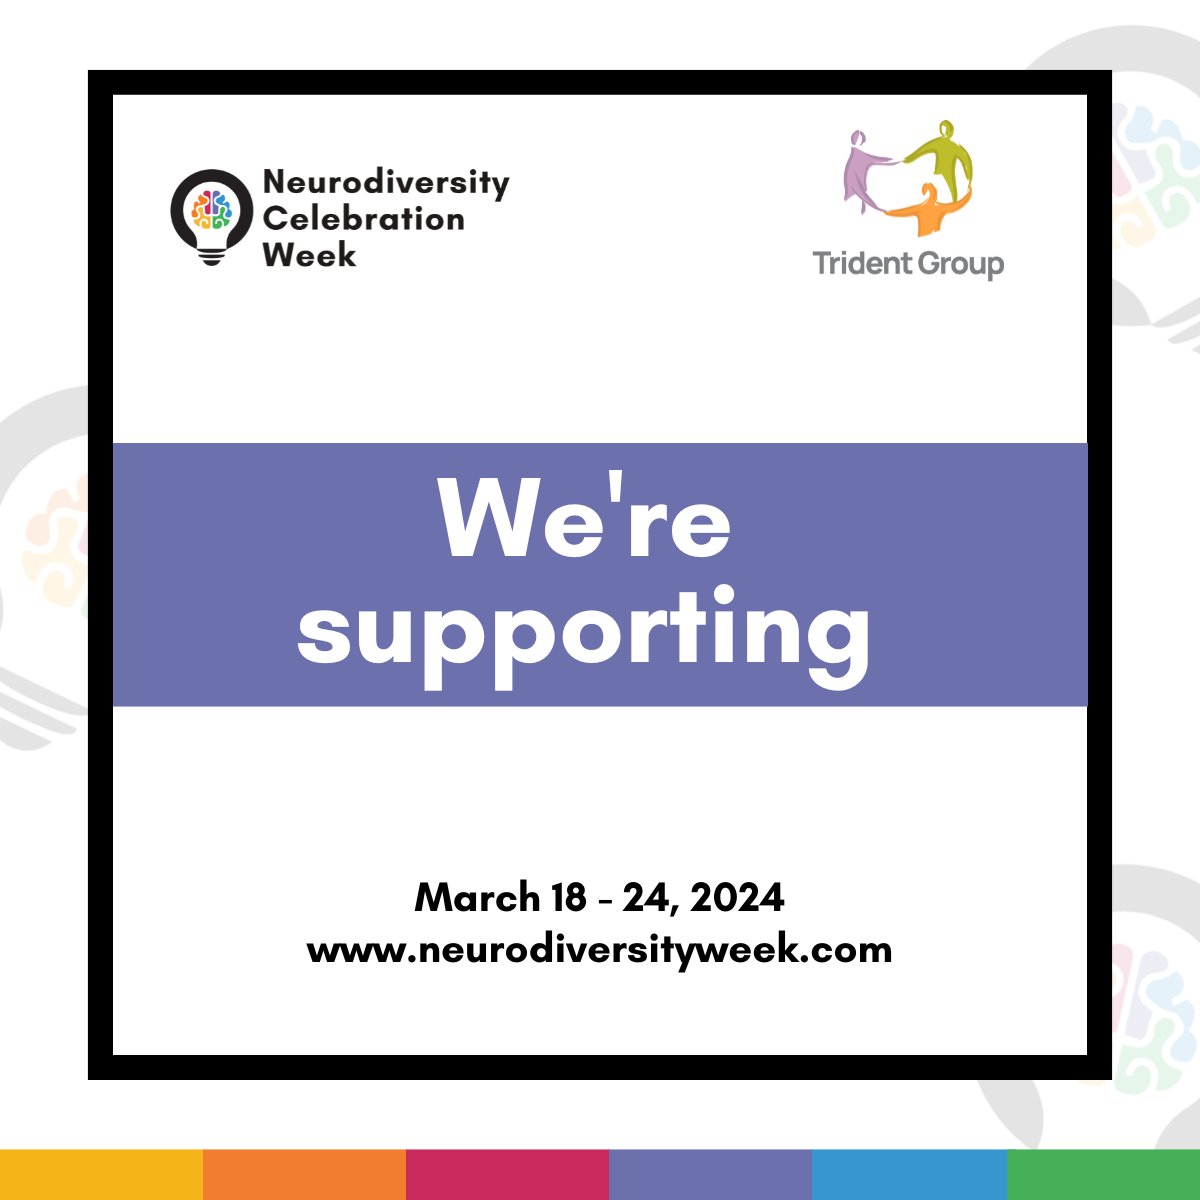 We support Neurodiversity Celebration Week. As well as the services we provide for neurodiverse people and we are proud to provide assistive tools on our website. Check it out here 👇 tridentgroup.org.uk #NeurodiversityCelebrationWeek #NCW